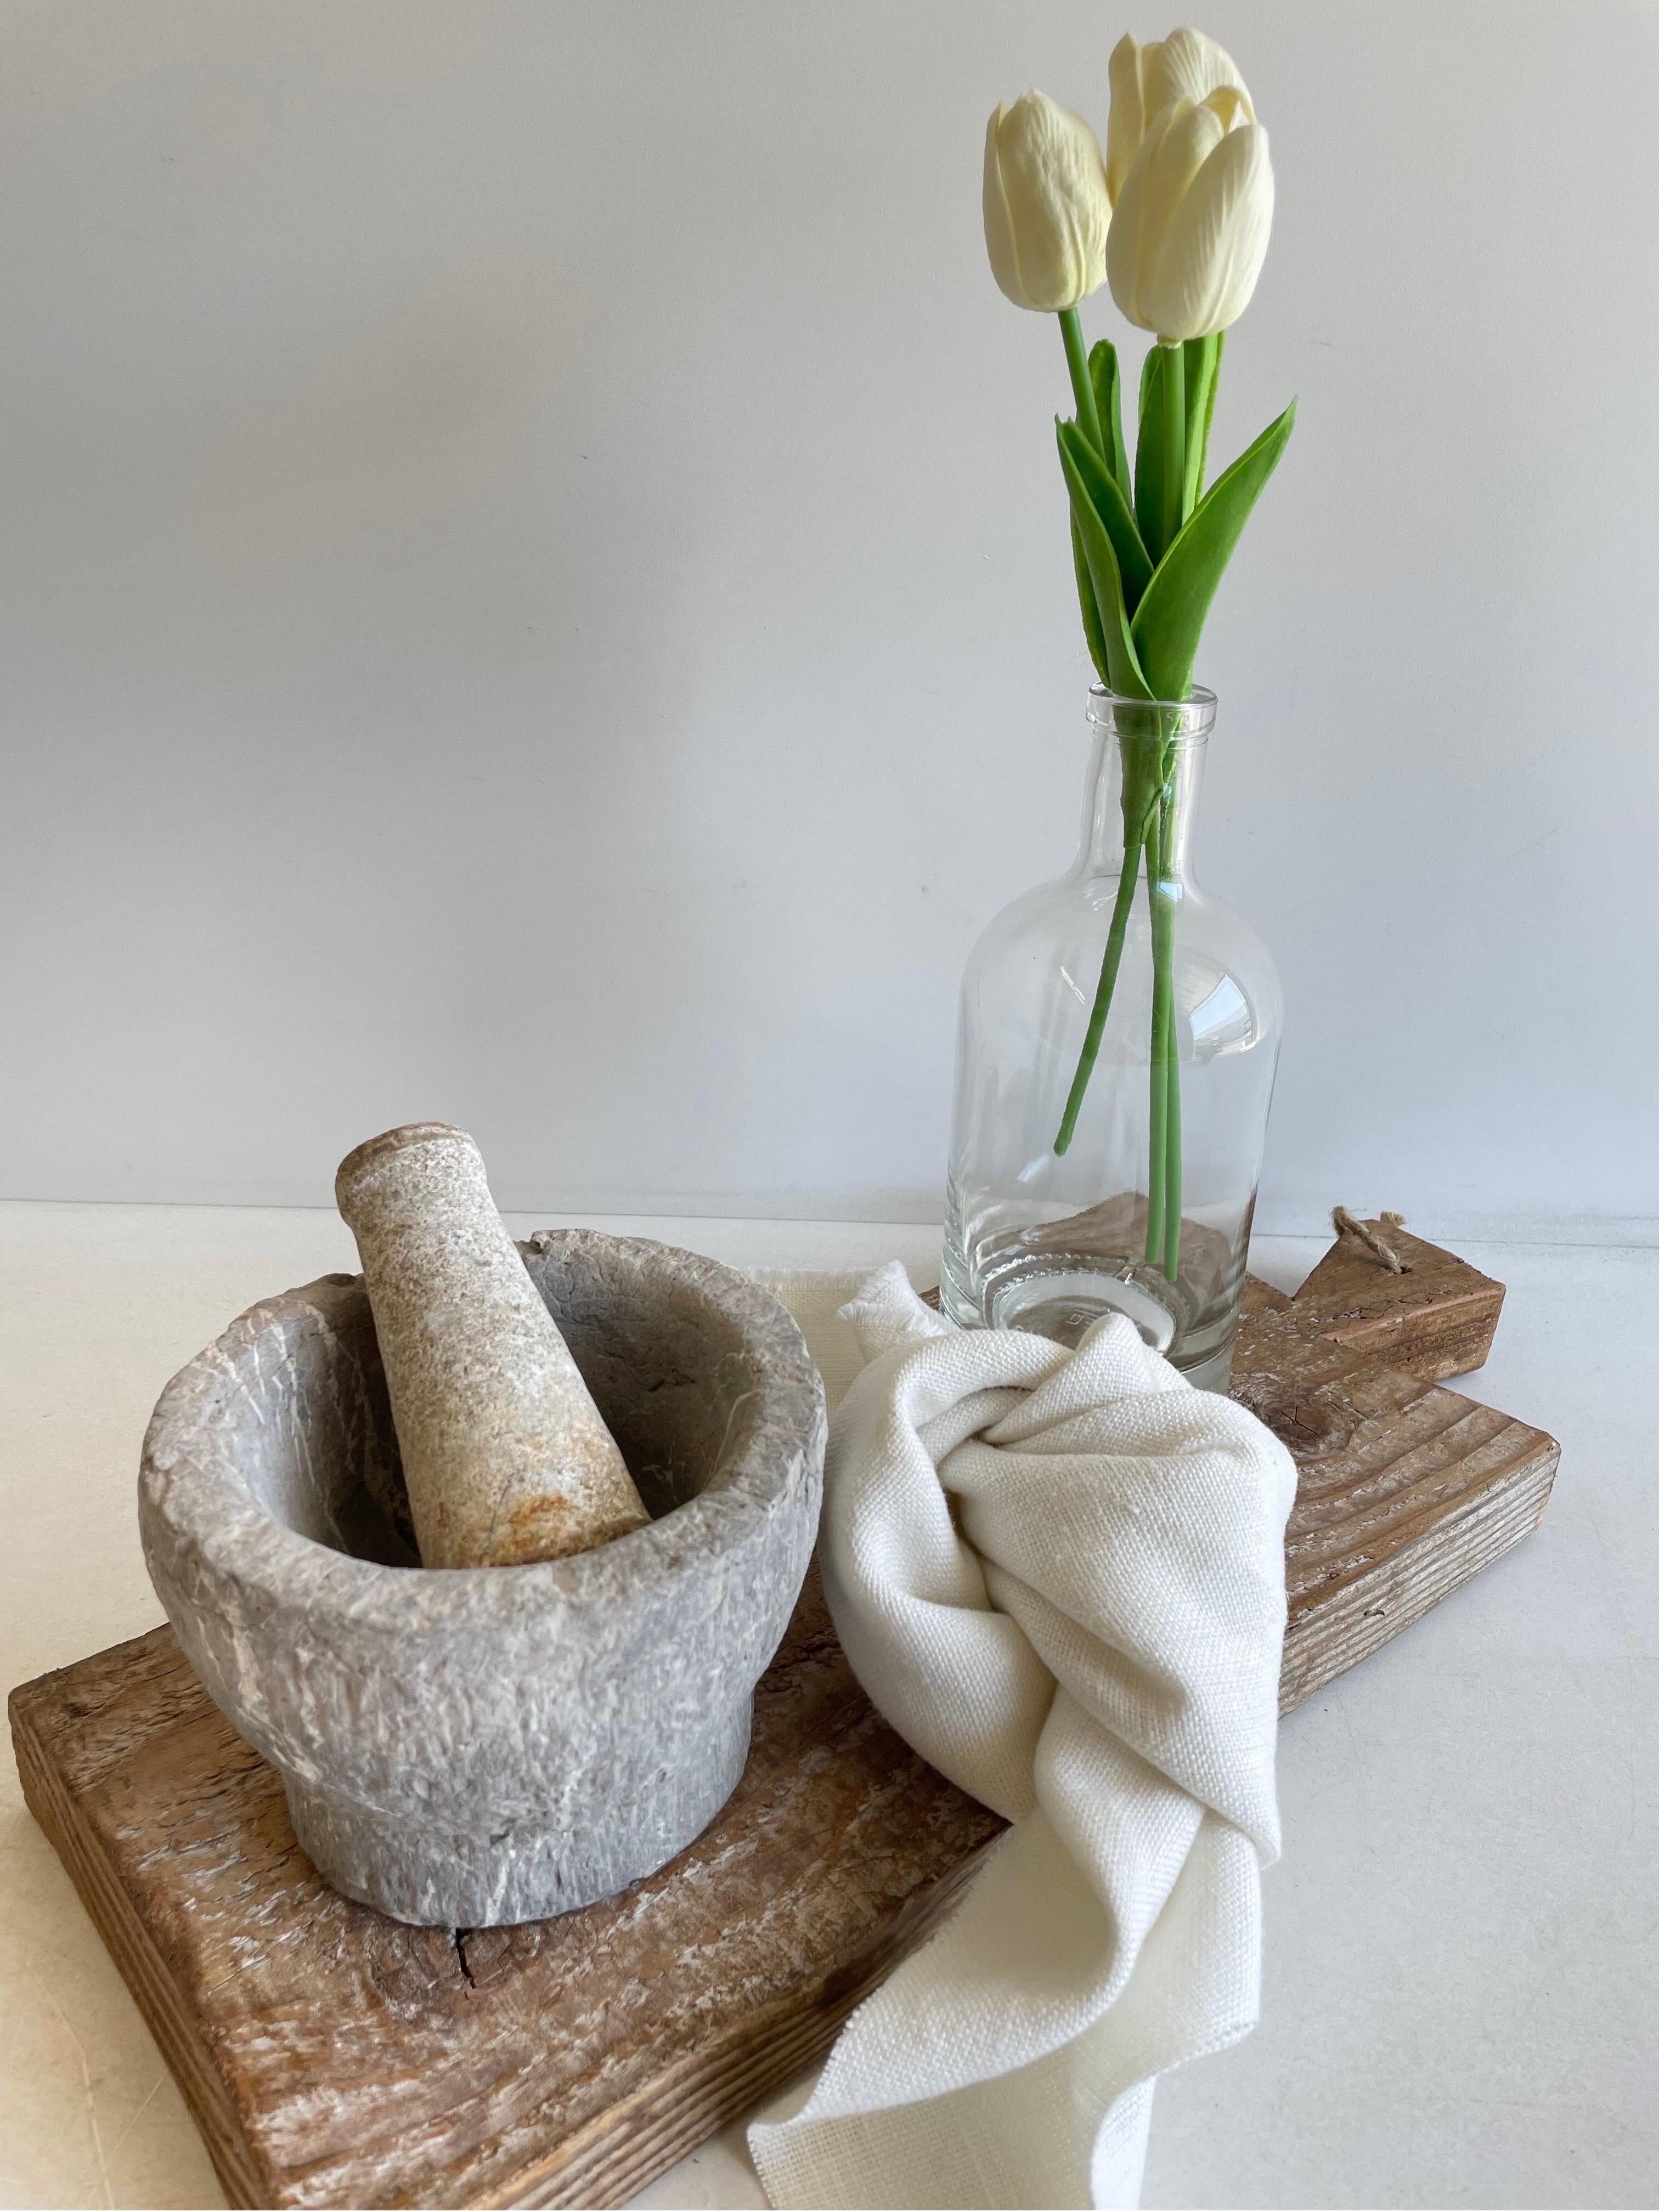 Antique stone mortar and pestle bowl set, great decorative item, or can be used.
Accessories not included
Size: 4”H x 5 1/2”D x 4 1/2”O.